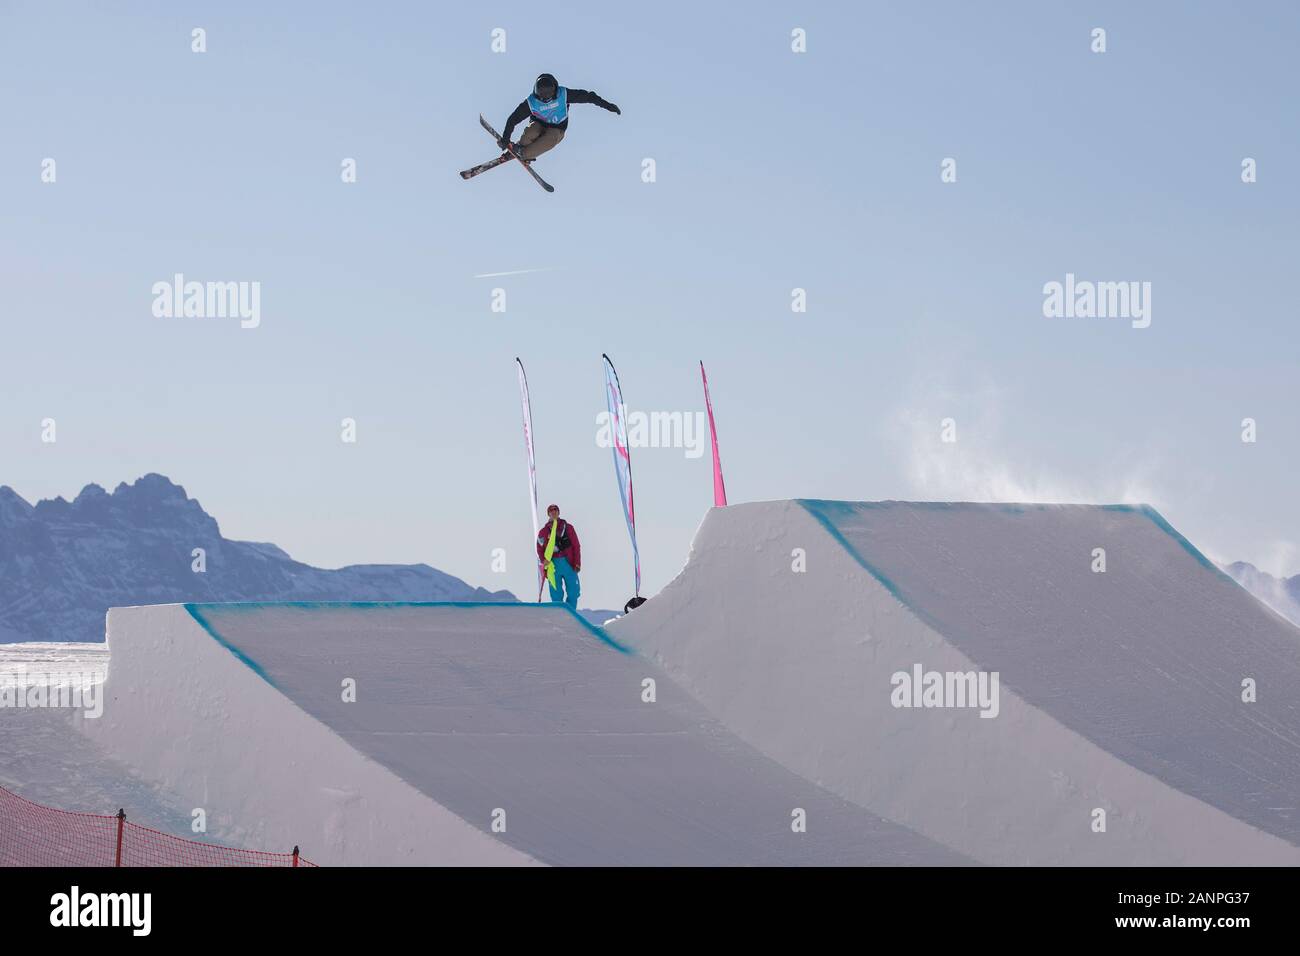 Team GBs Jasper Klien (17) during freeski slopestyle training at the Lausanne 2020 Youth Olympic Games on the 16h January 2020 at Leysin Park & Pipe Stock Photo